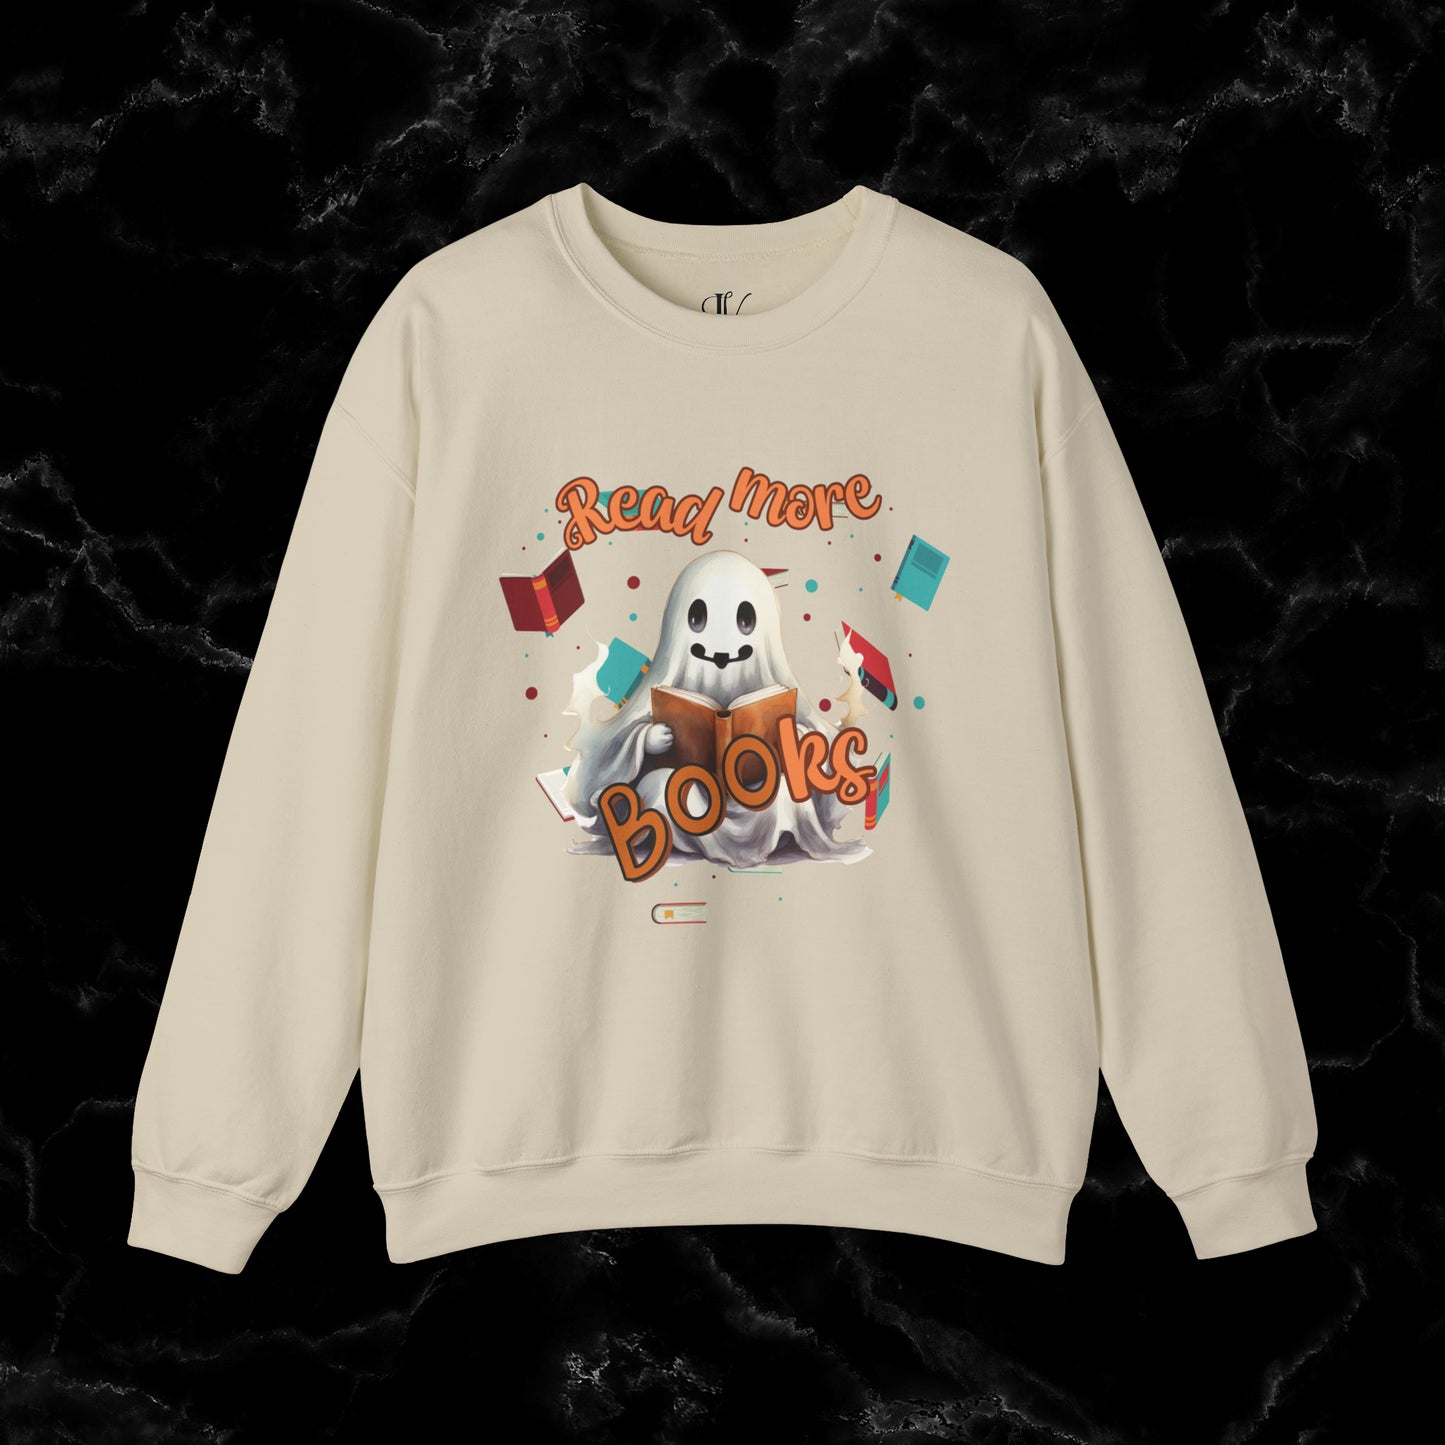 Read More Books Sweatshirt - Book Lover Halloween Sweater for Librarians and Students Sweatshirt S Sand 